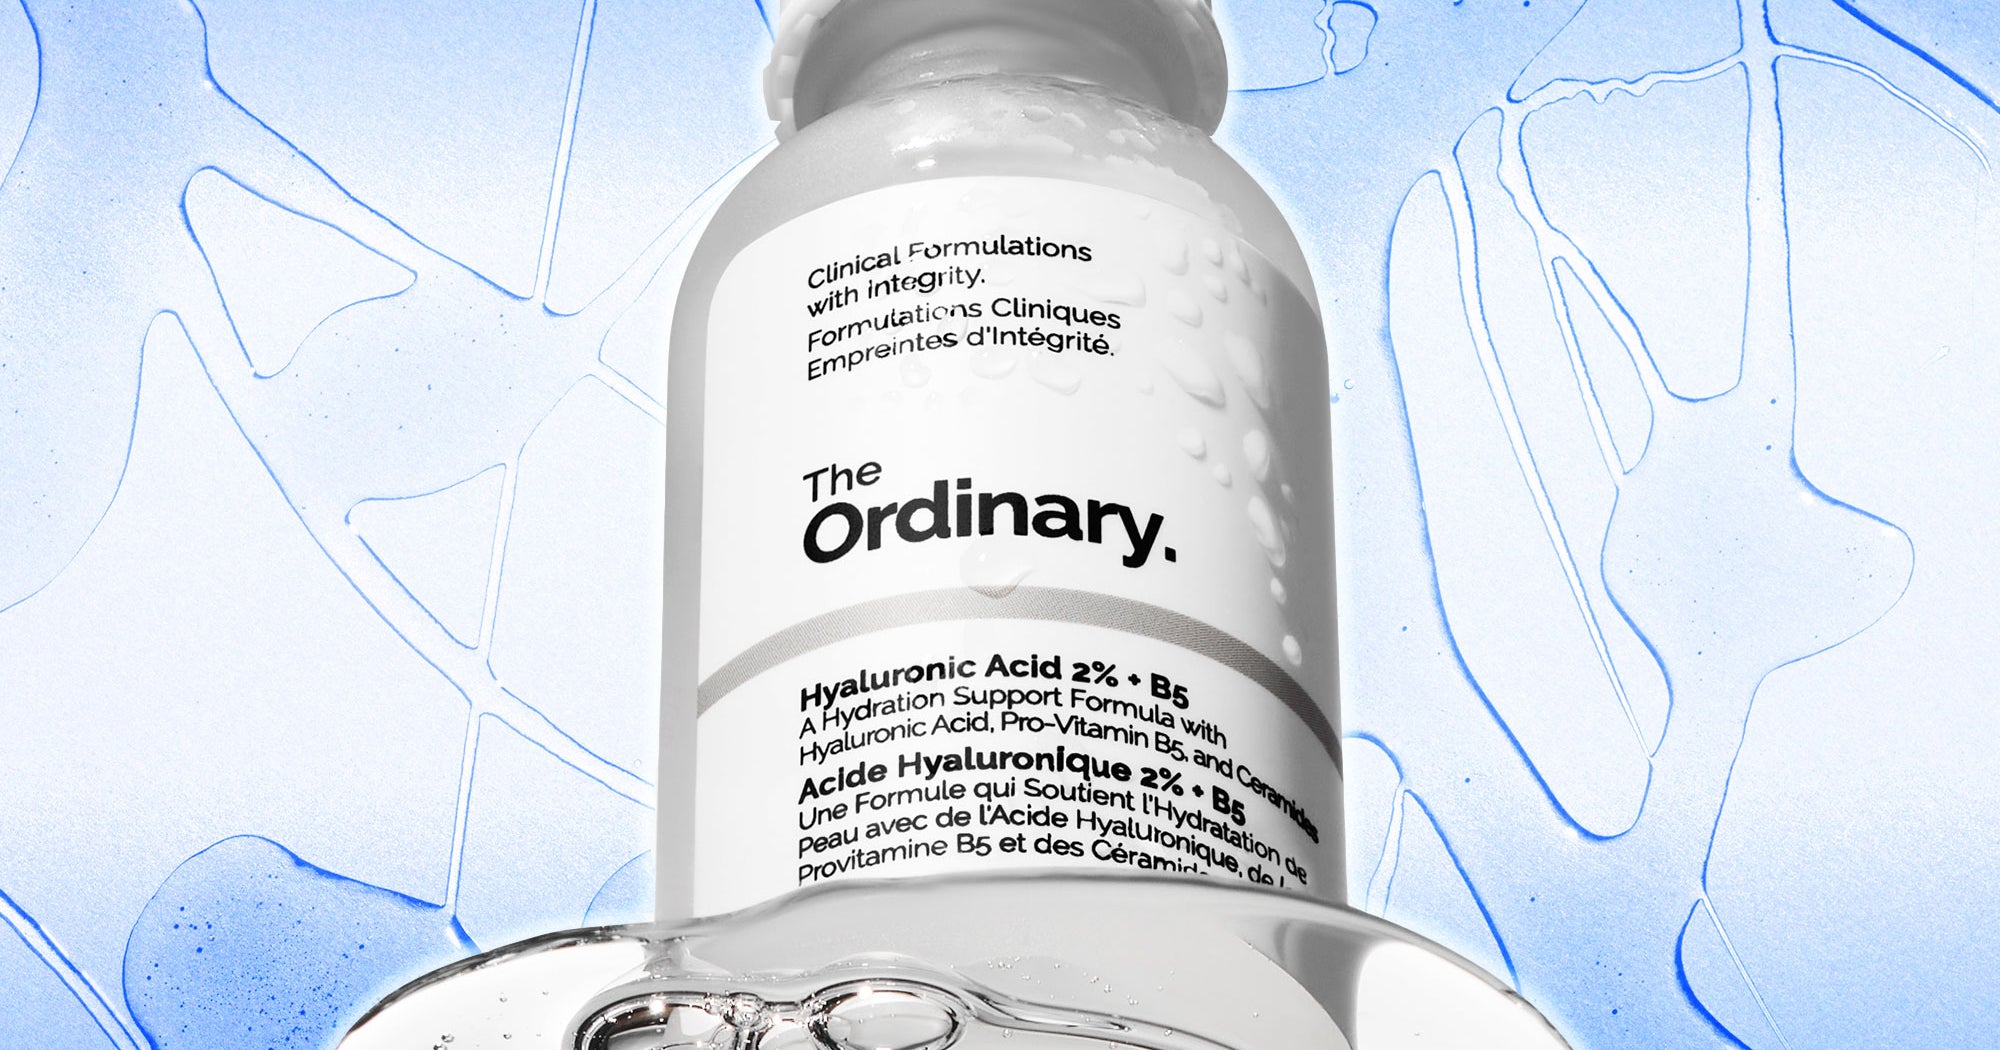 The Ordinary Reformulated One Of Its Bestselling Serums — Here’s Why